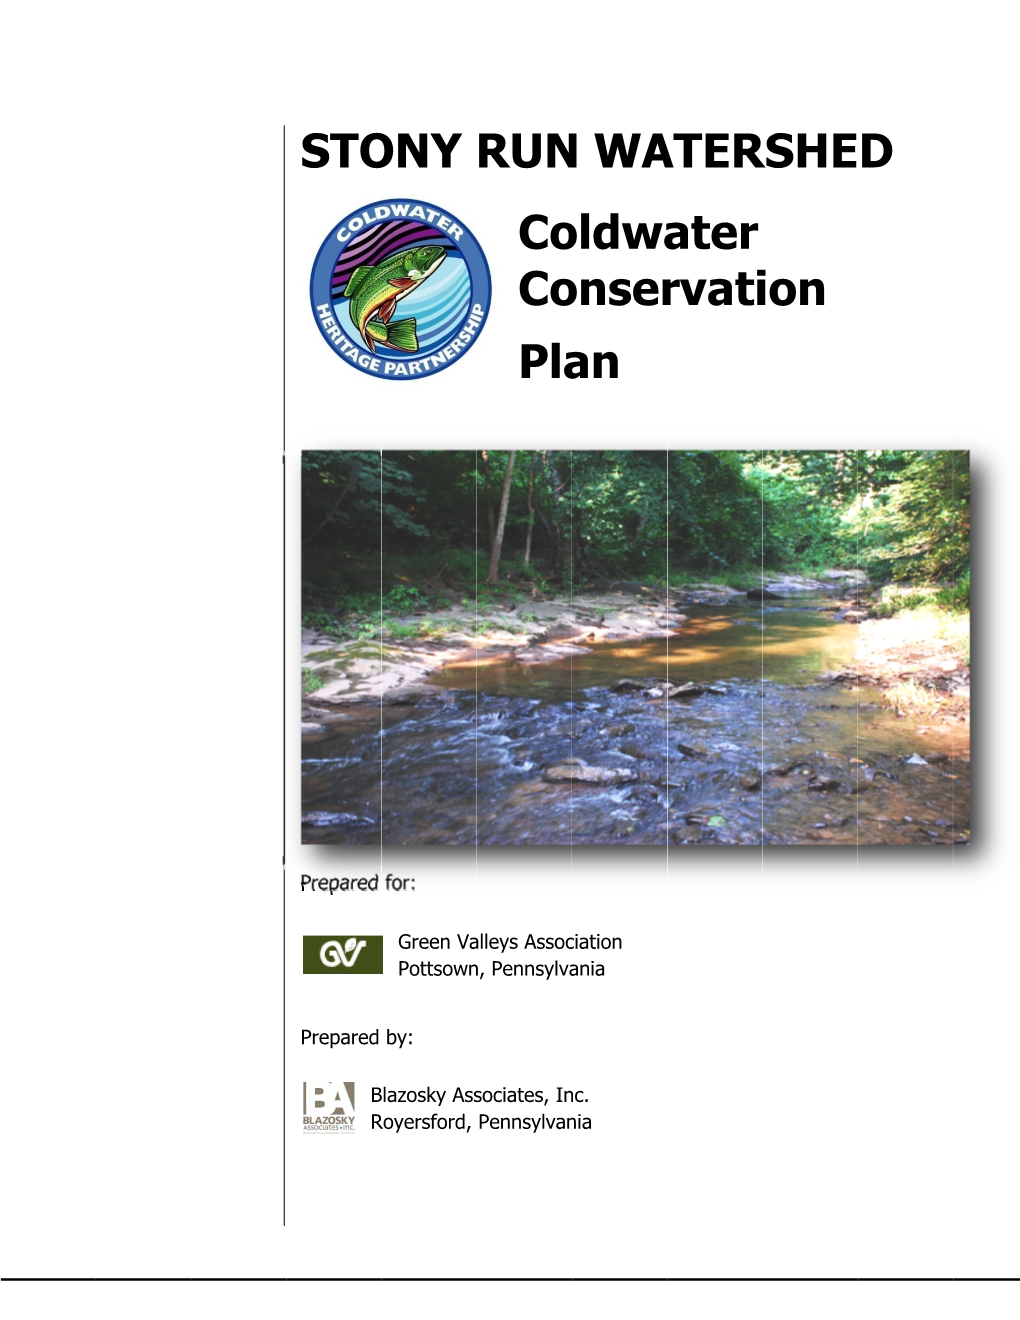 STONY RUN WATERSHED Coldwater Conservation Plan